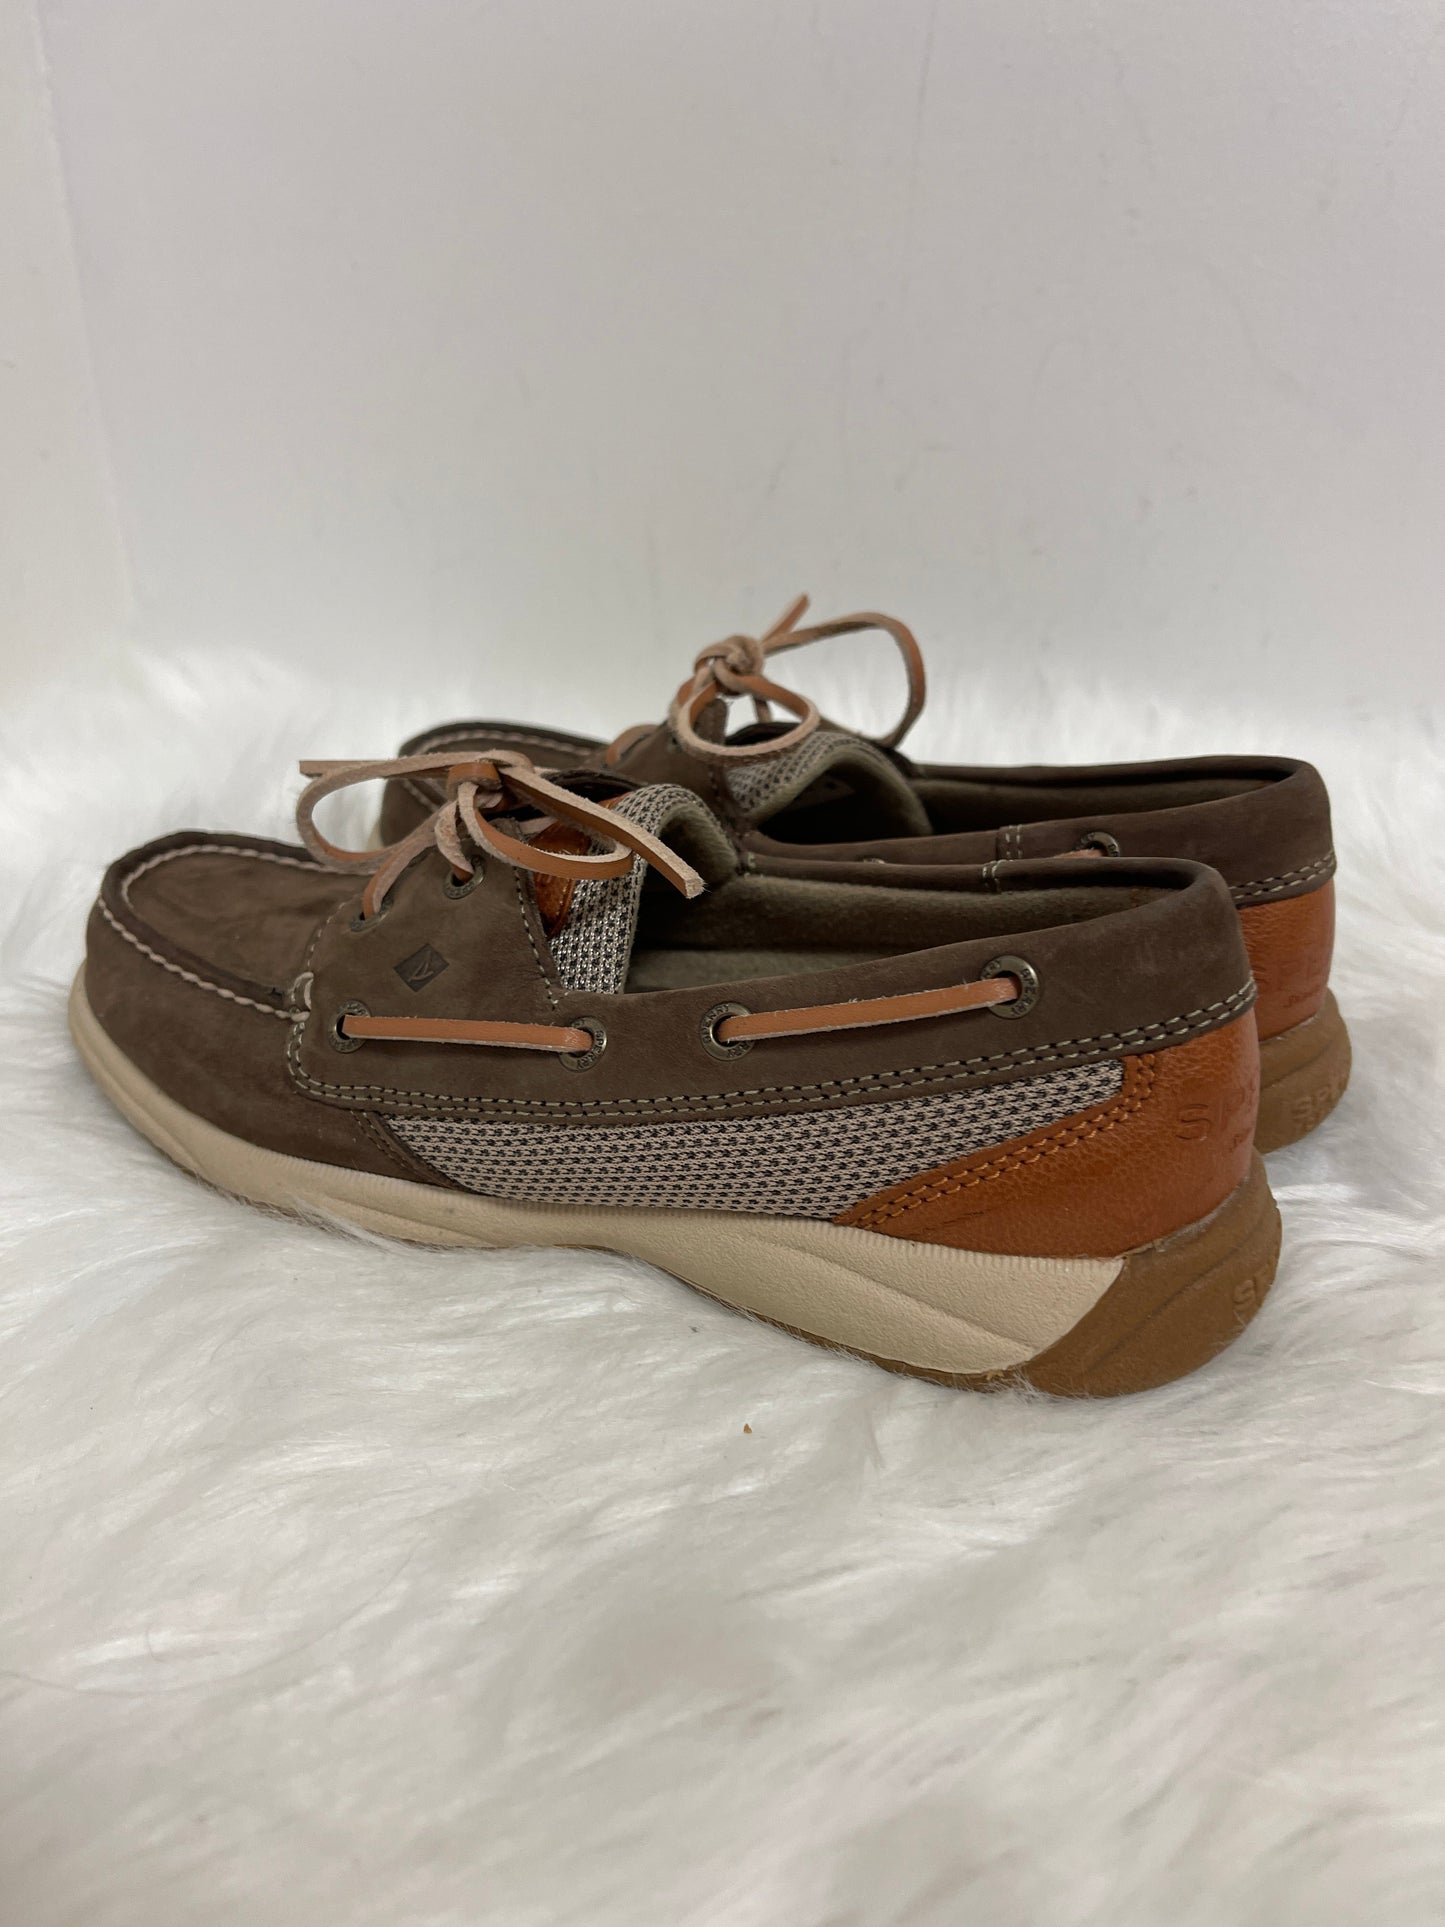 Brown Shoes Flats Sperry, Size 6